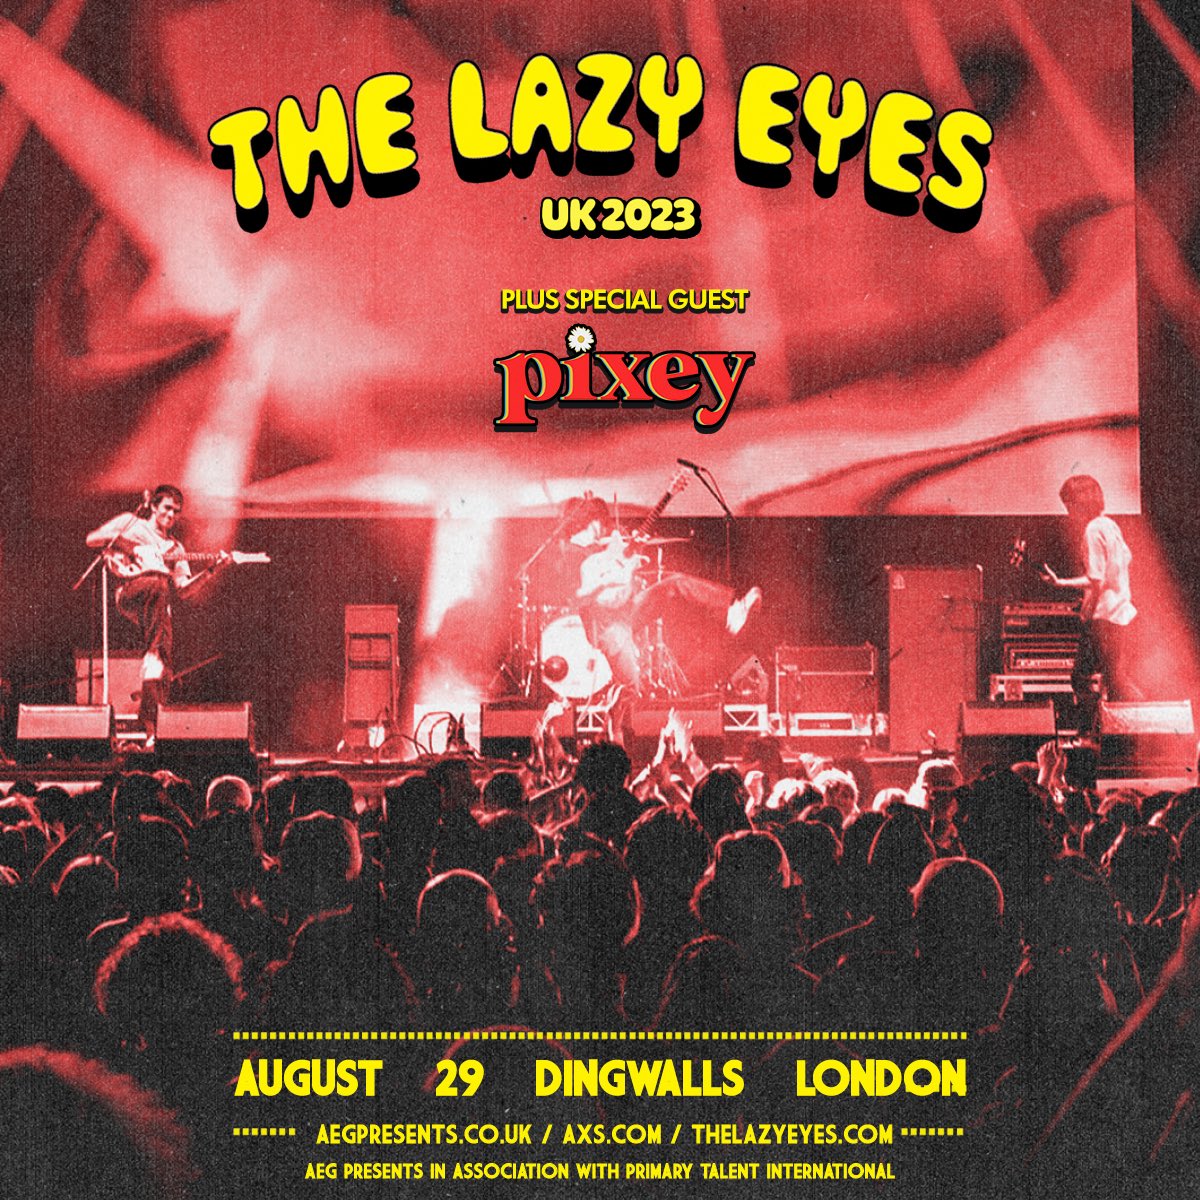 🌼 Liverpool rock and roller @pixeyofficial will be supporting @TheLazyEyesband at their Dingwalls show on August 29, 2023 🌼 Remaining tickets here: axs.com/uk/events/4834…